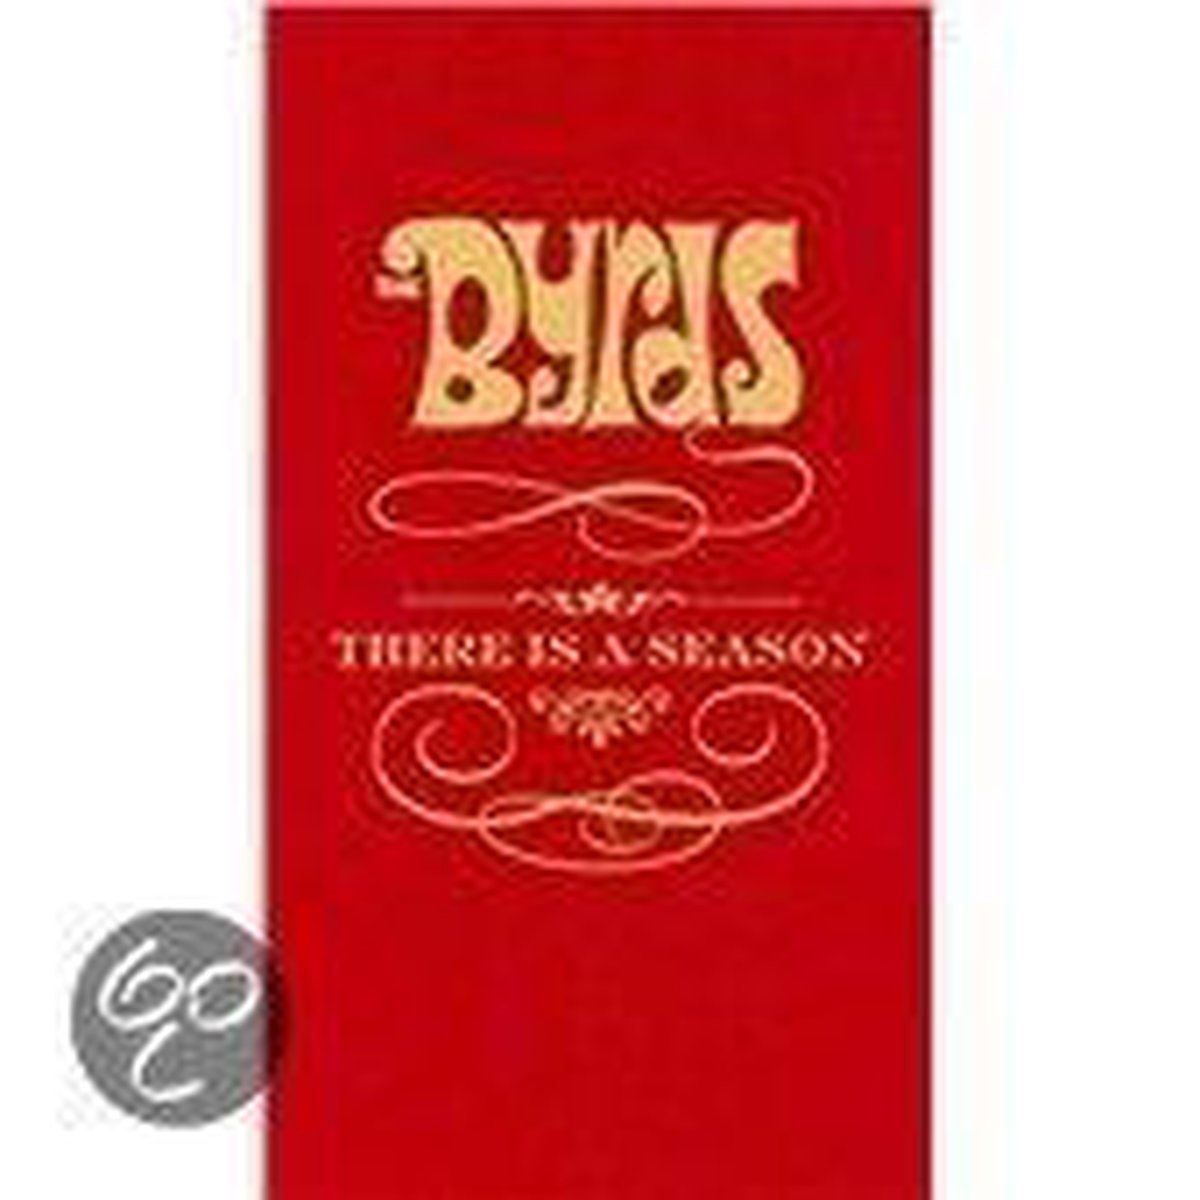 There Is a Season - The Byrds